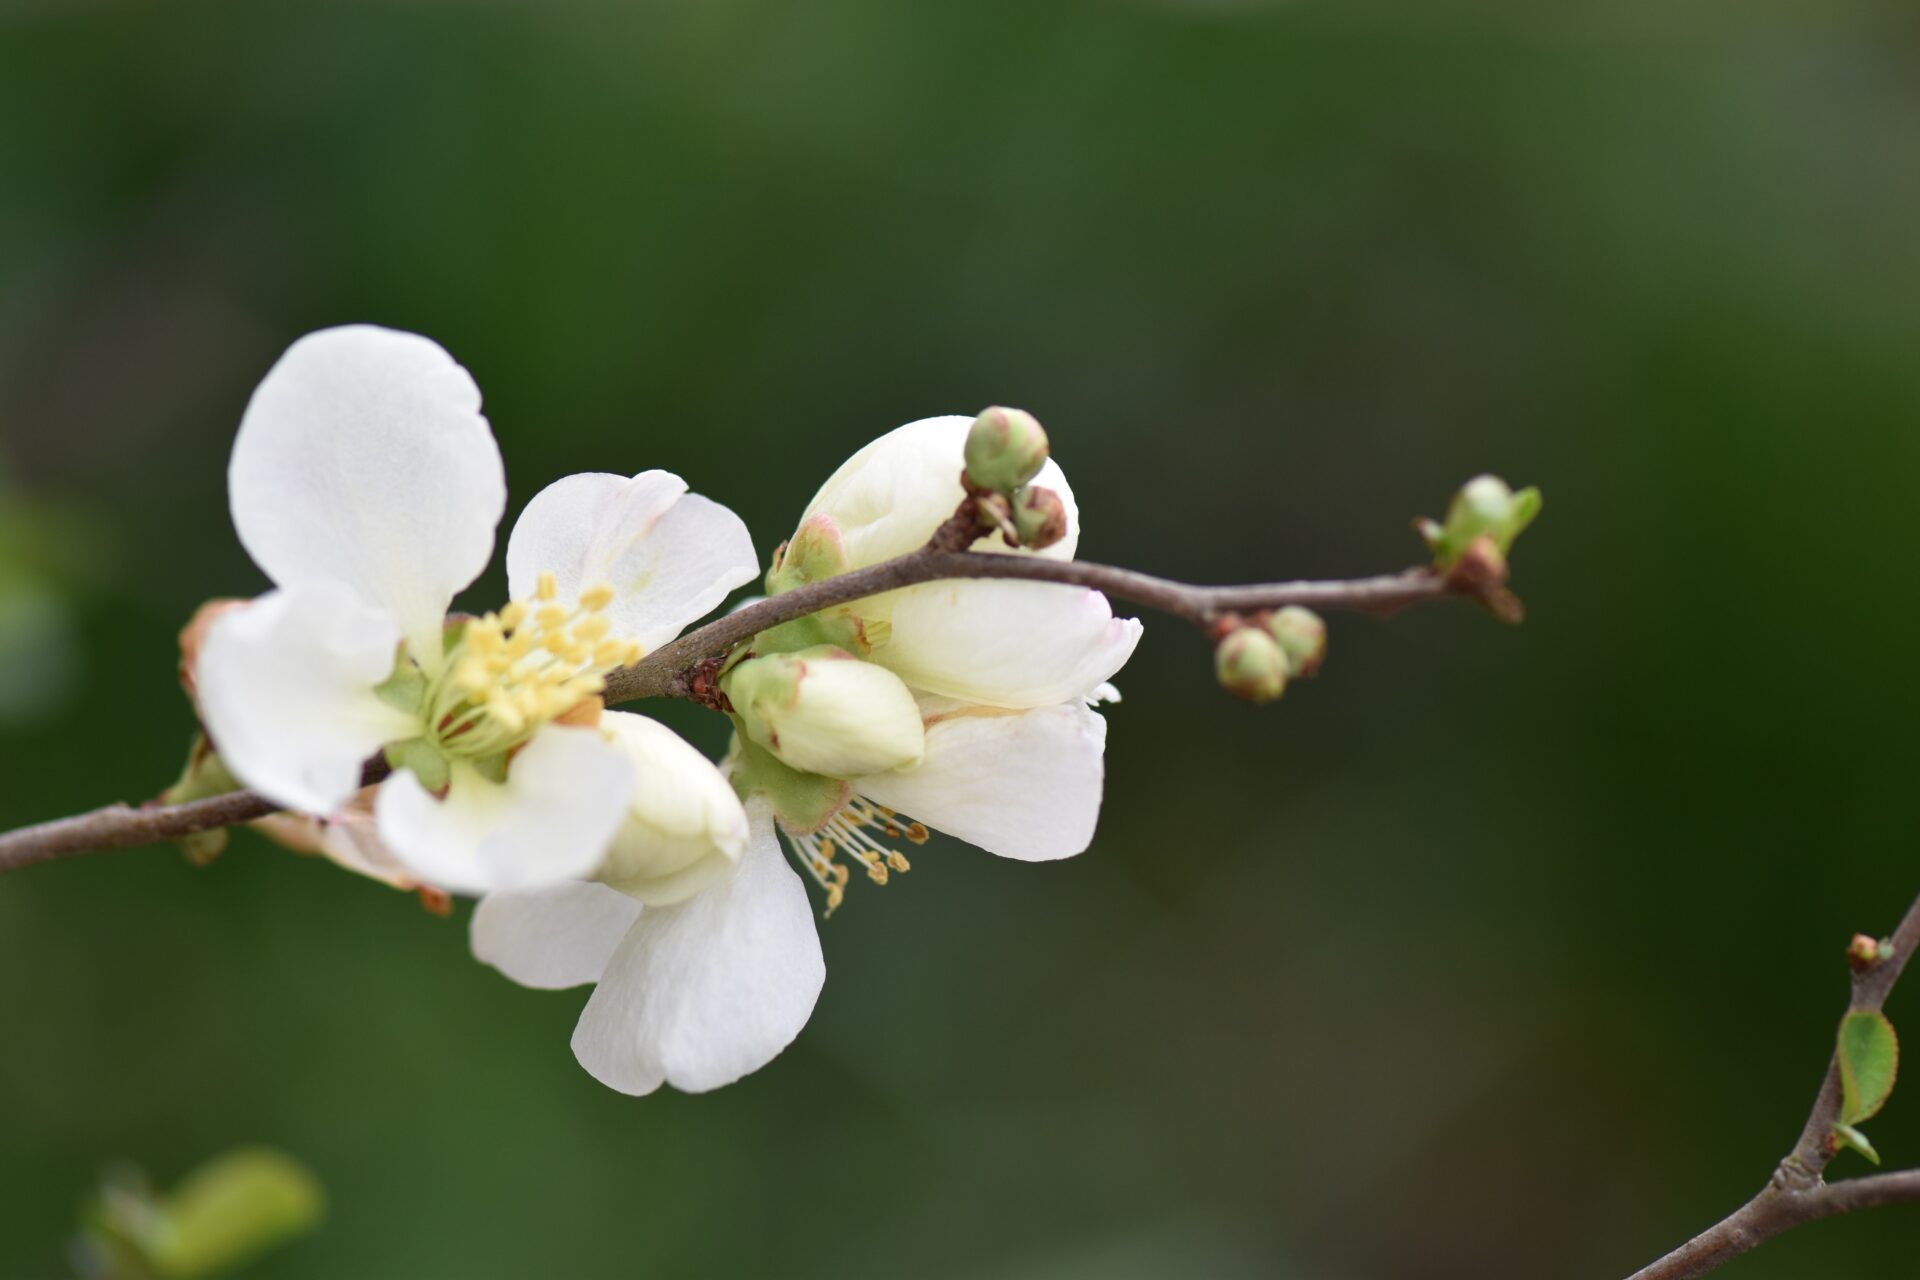 White flowers and flower buds on a thin branch